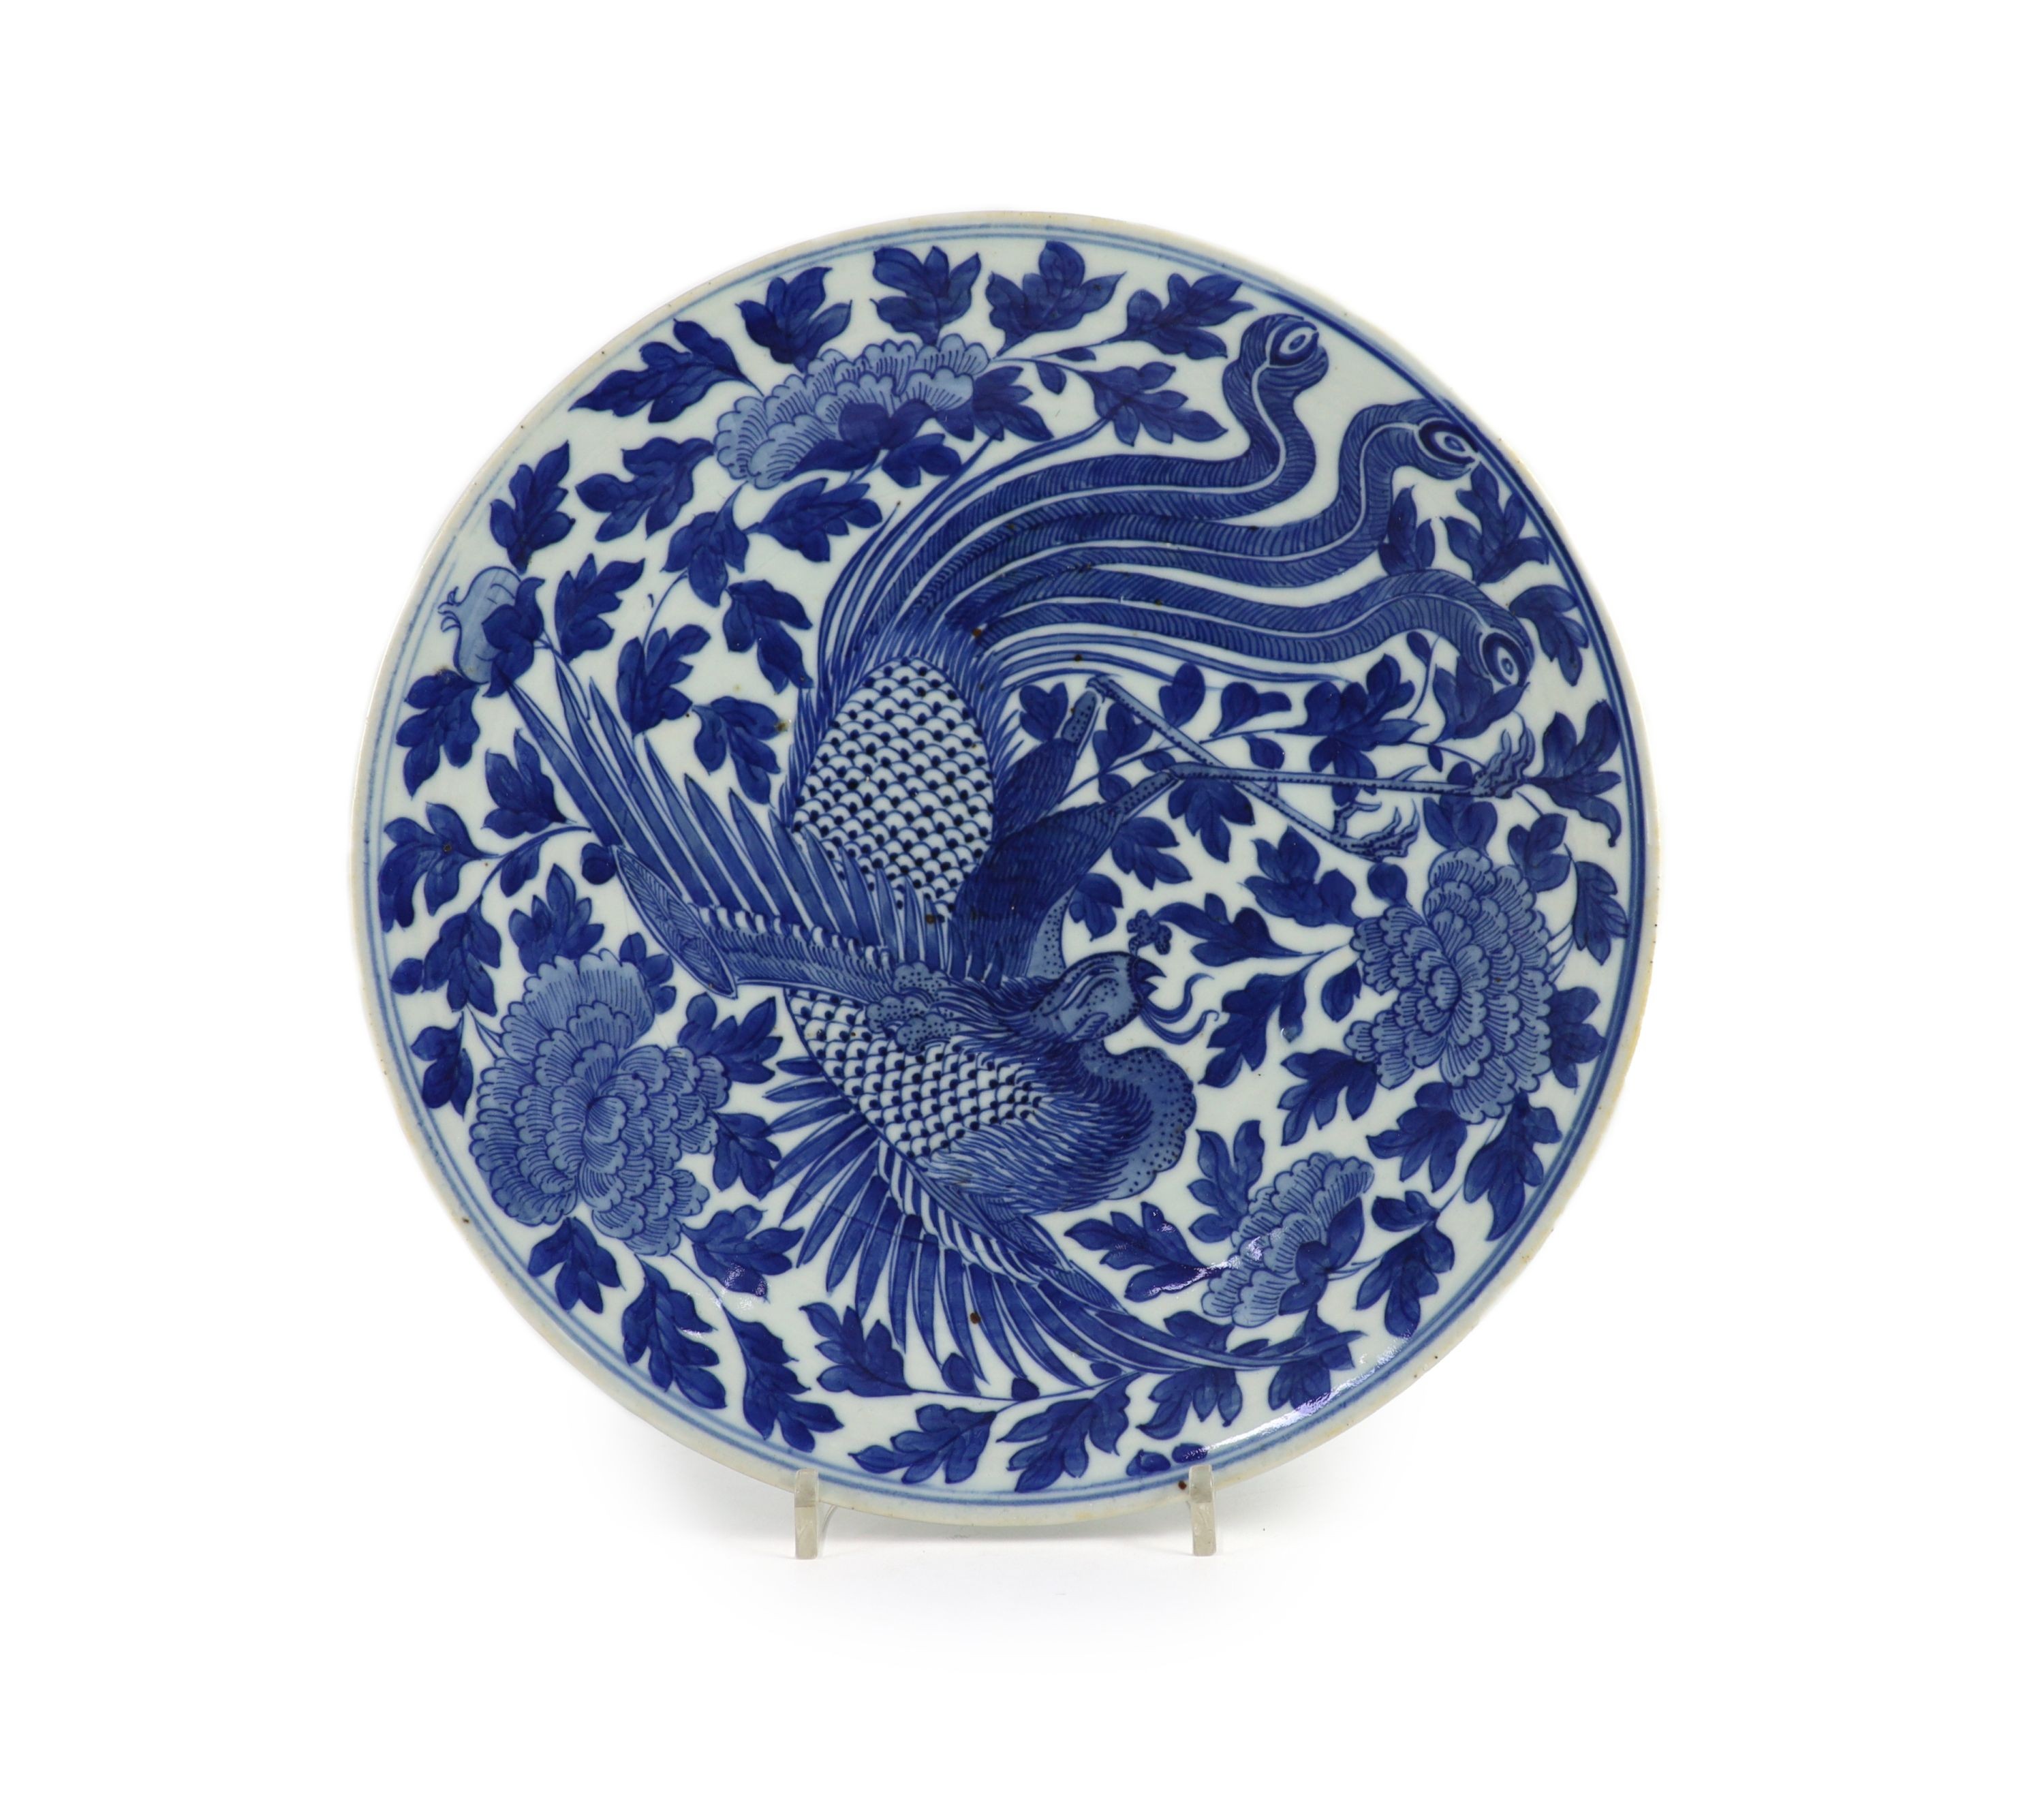 A Chinese blue and white ‘phoenix’ dish, Daoguang mark and period (1821-50), 29.7 cm diameter